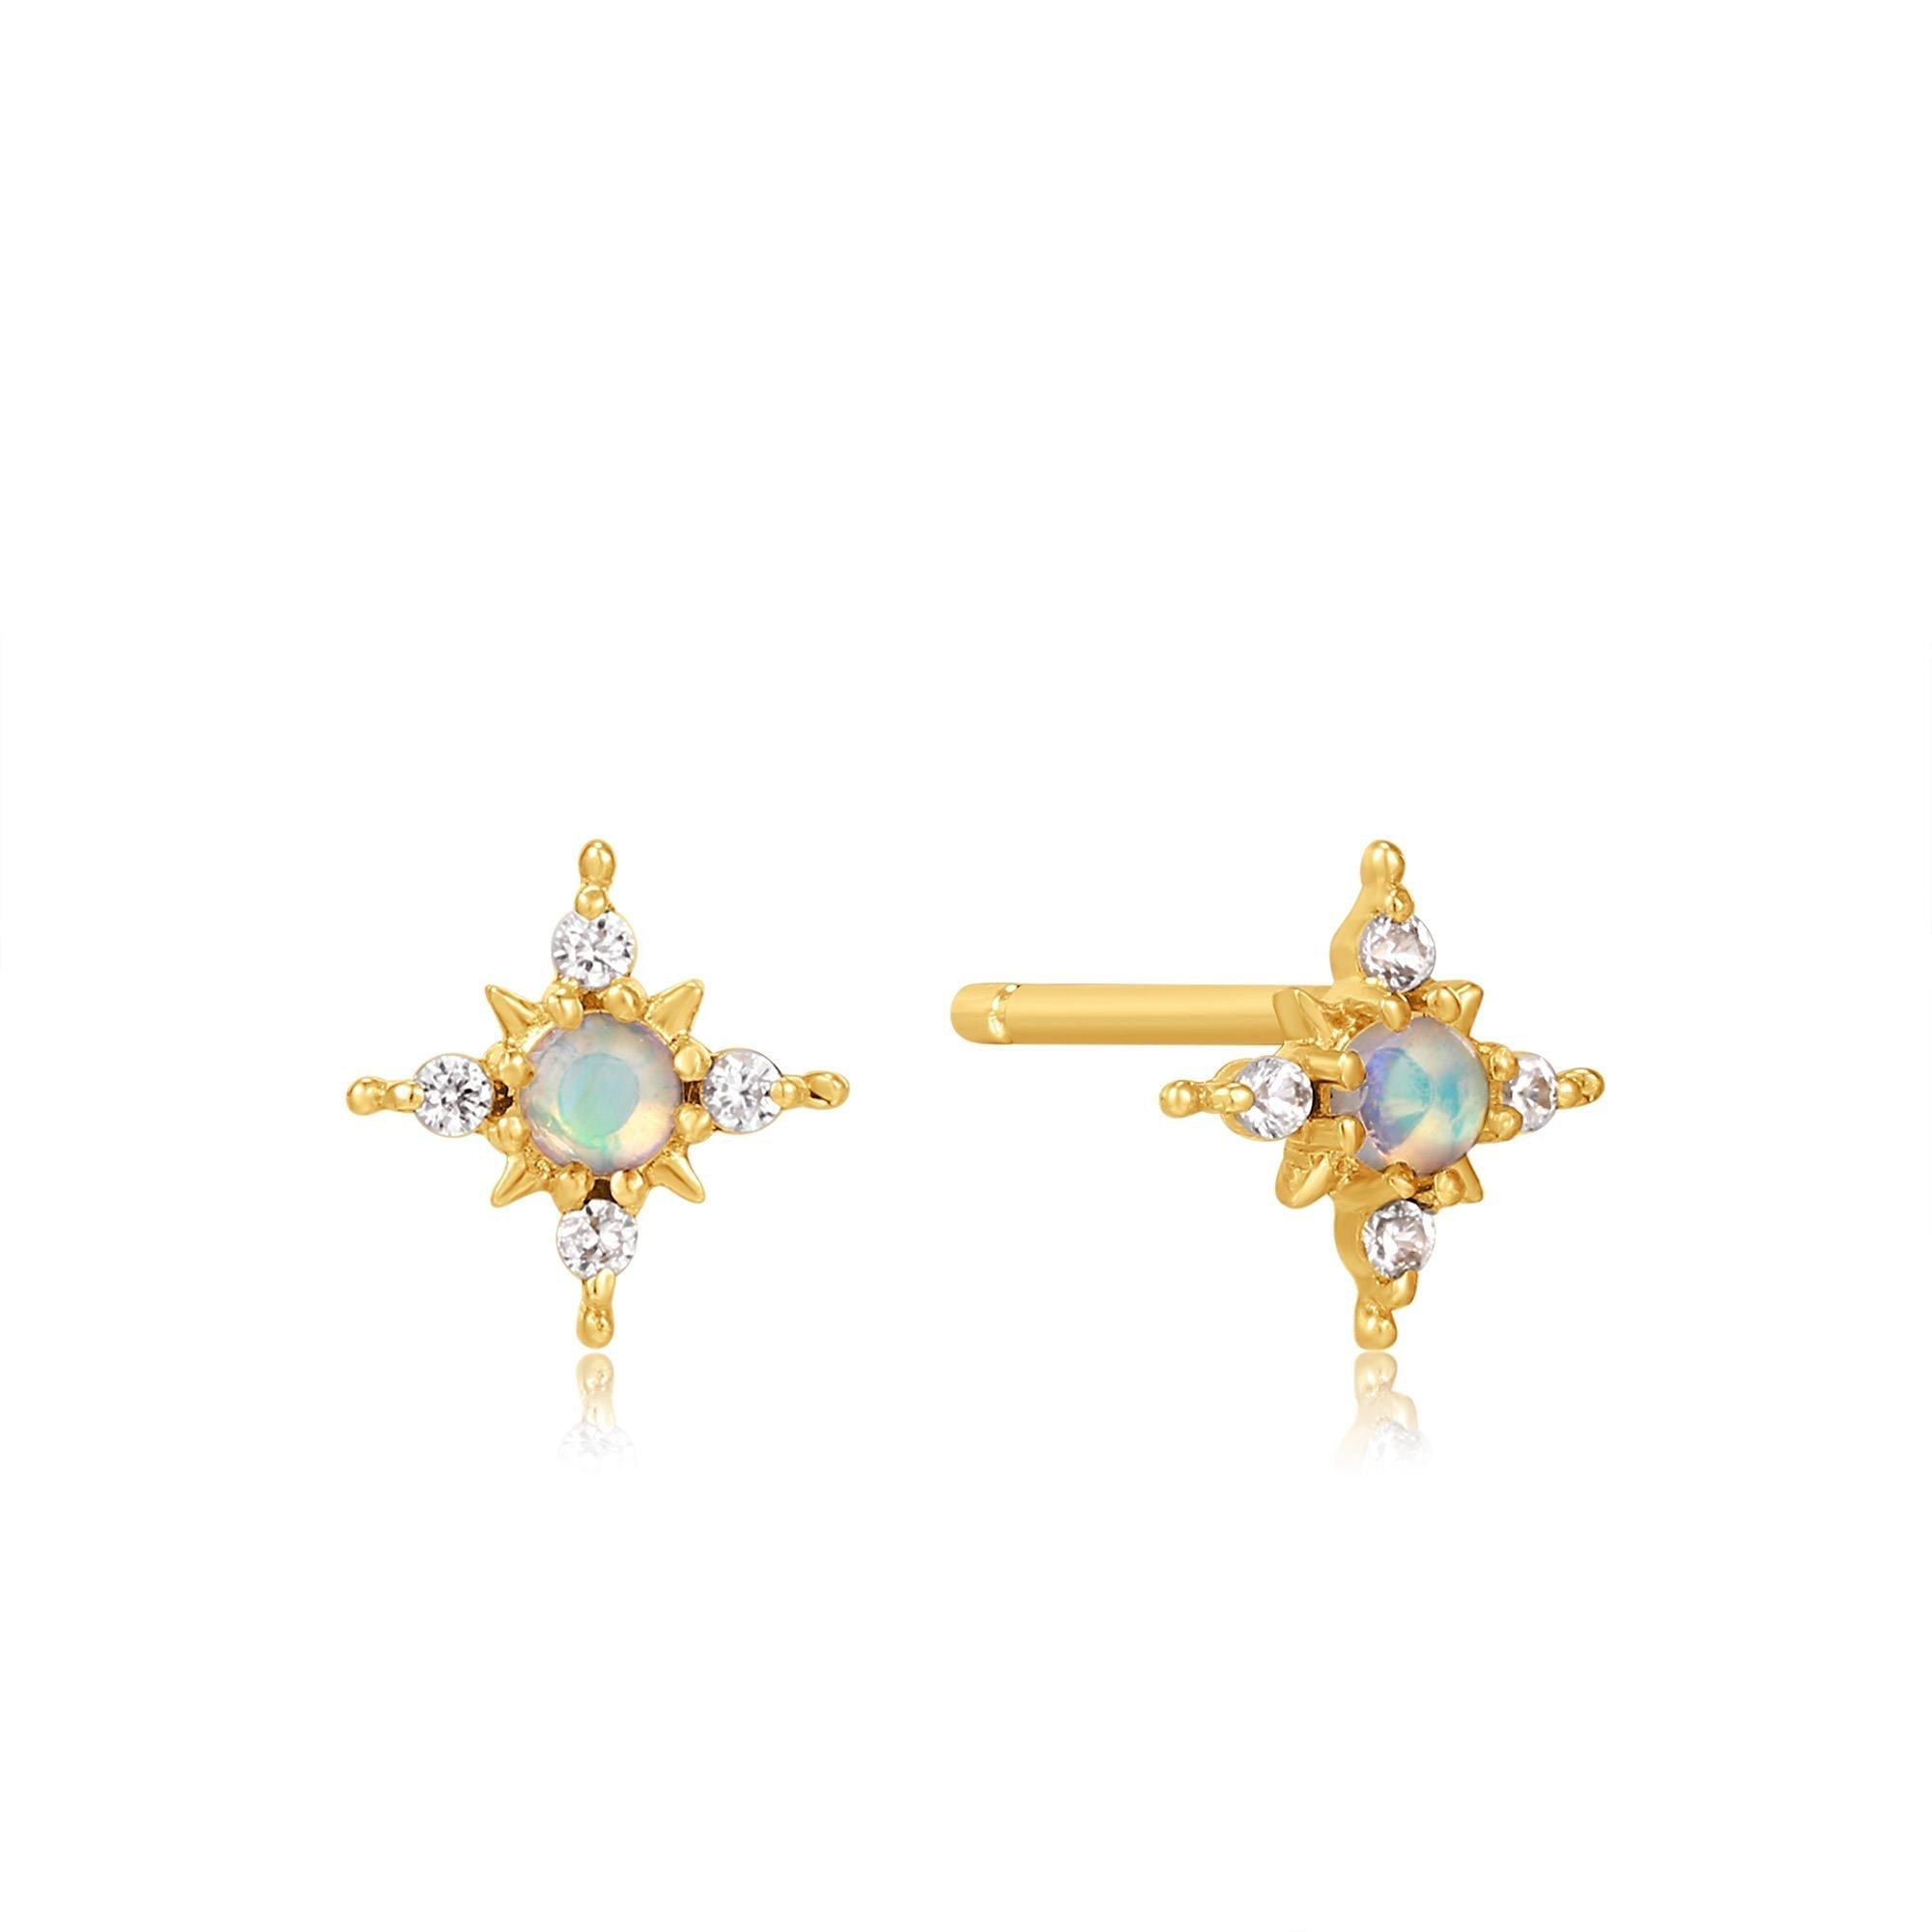 Ania Haie 14ct Gold Opal and White Sapphire Star Stud Earrings